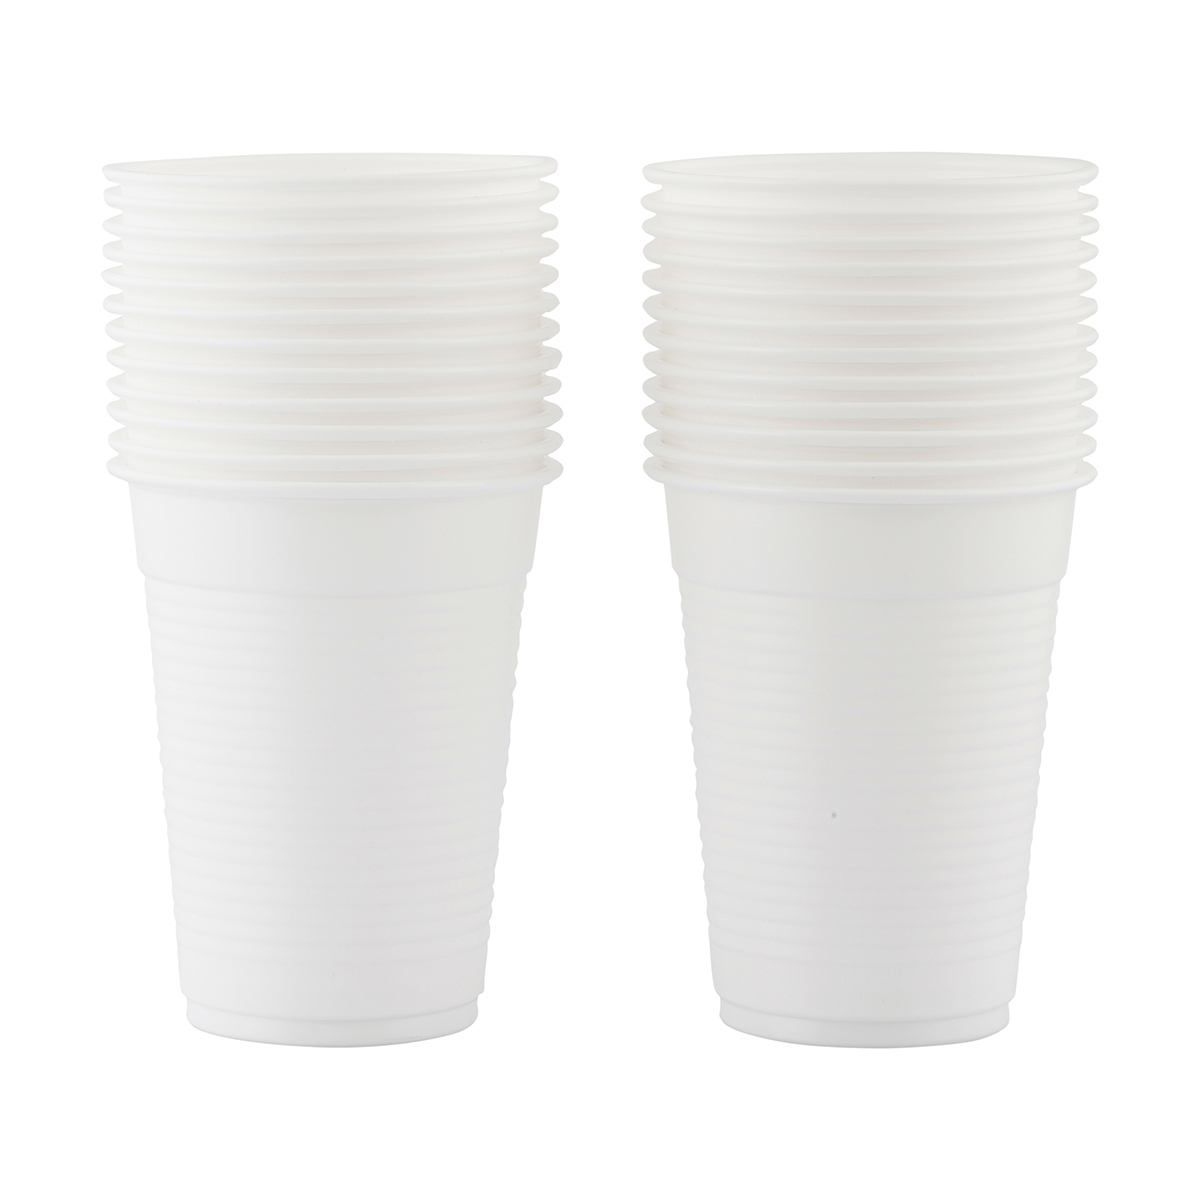 Plastic Cups - White, Pack of 24